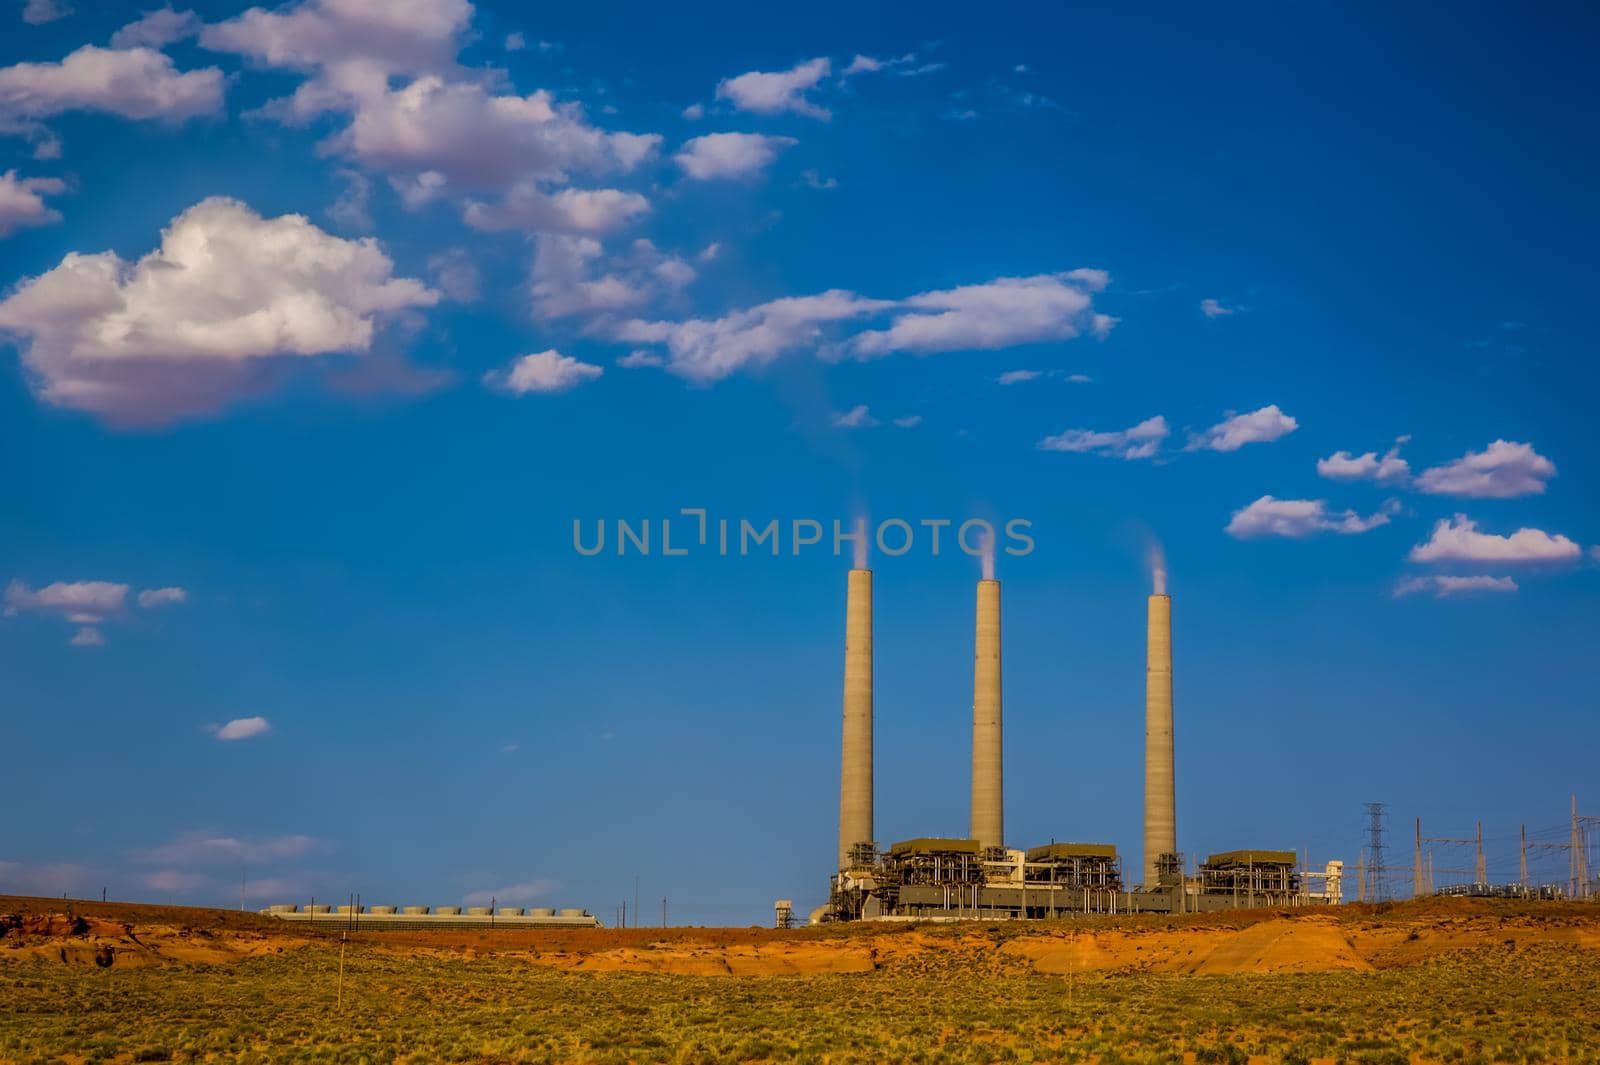 Page, Arizona - JUNE 3, 2013: The coal fired Navajo Generating Plant is said to be one of the 12th "dirtiest" power plants in the US.